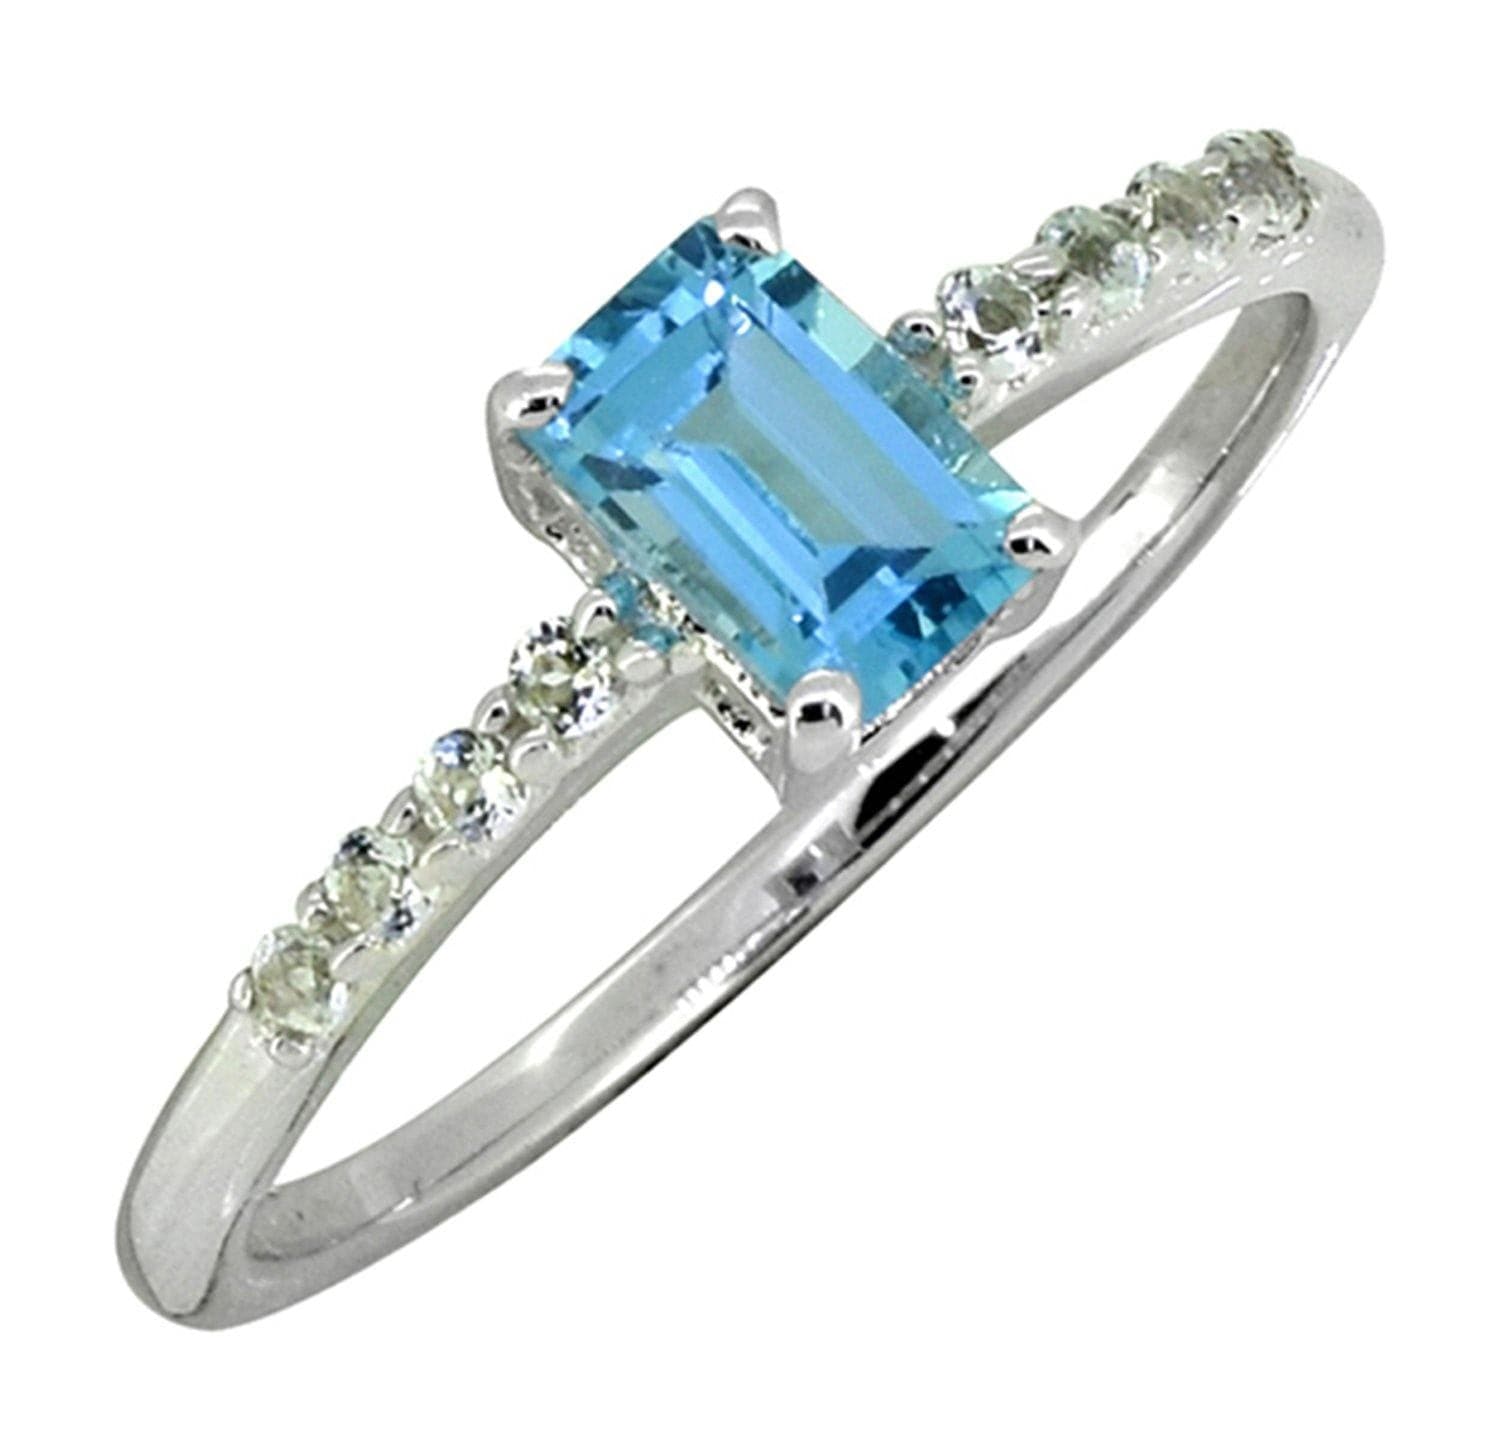 0.64 Ct Swiss Blue Topaz Solid 925 Sterling Silver Ring Jewelry - YoTreasure